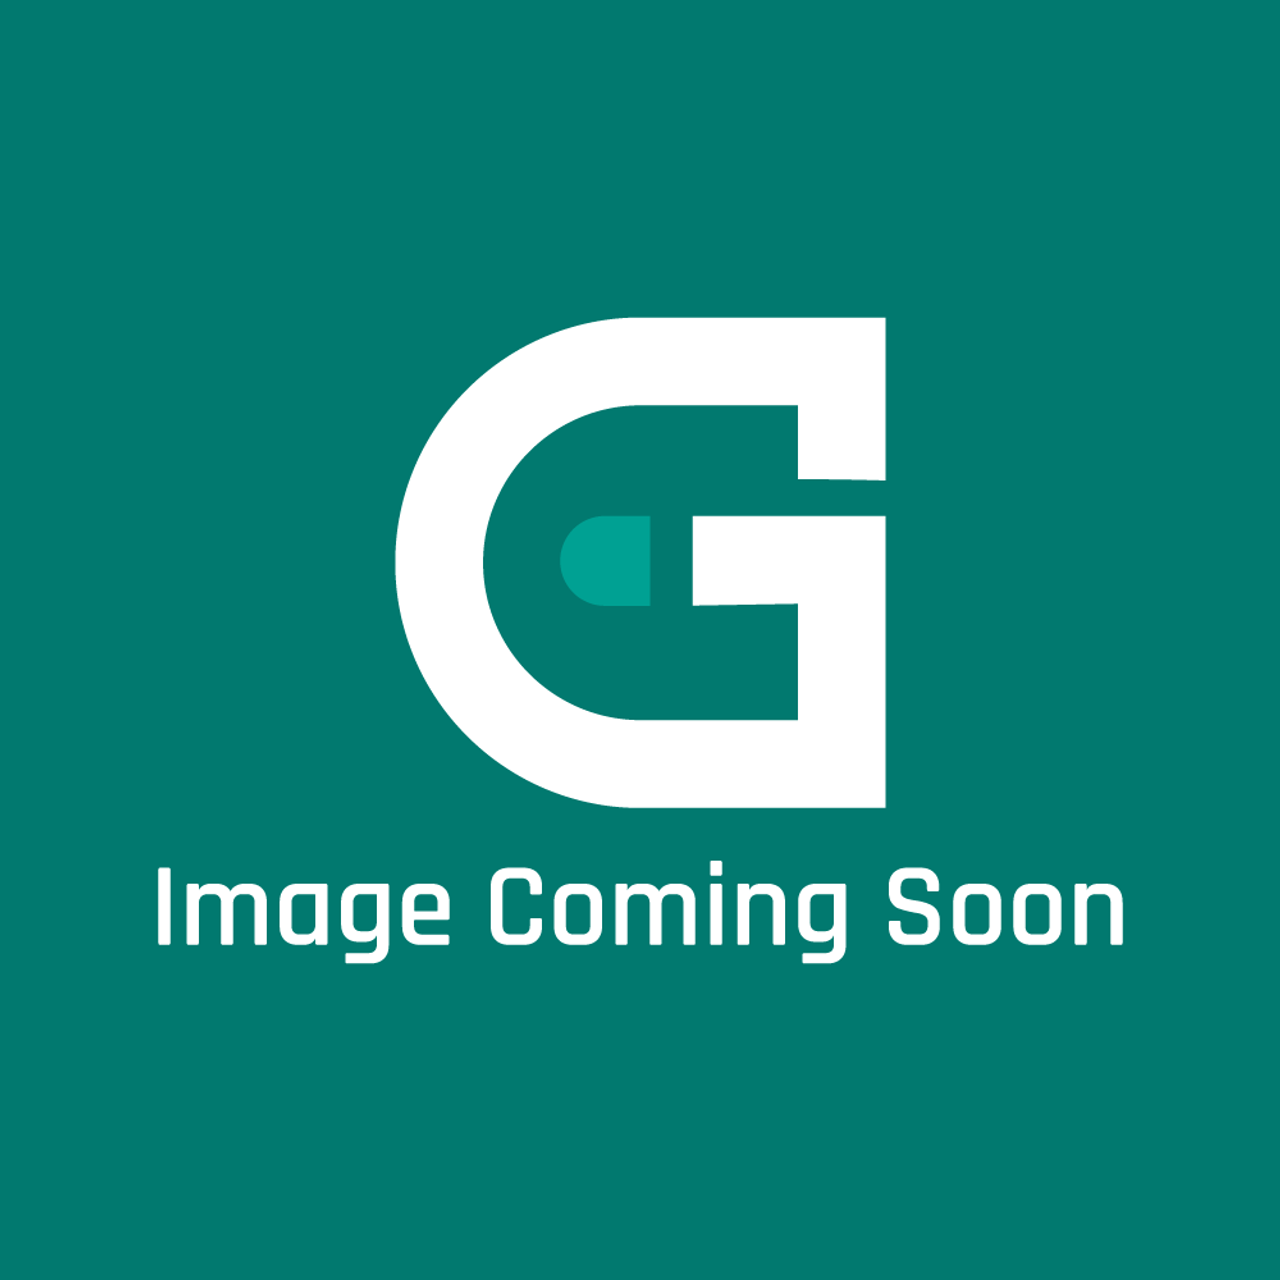 Frigidaire - Electrolux 318005227 Switch - Image Coming Soon!